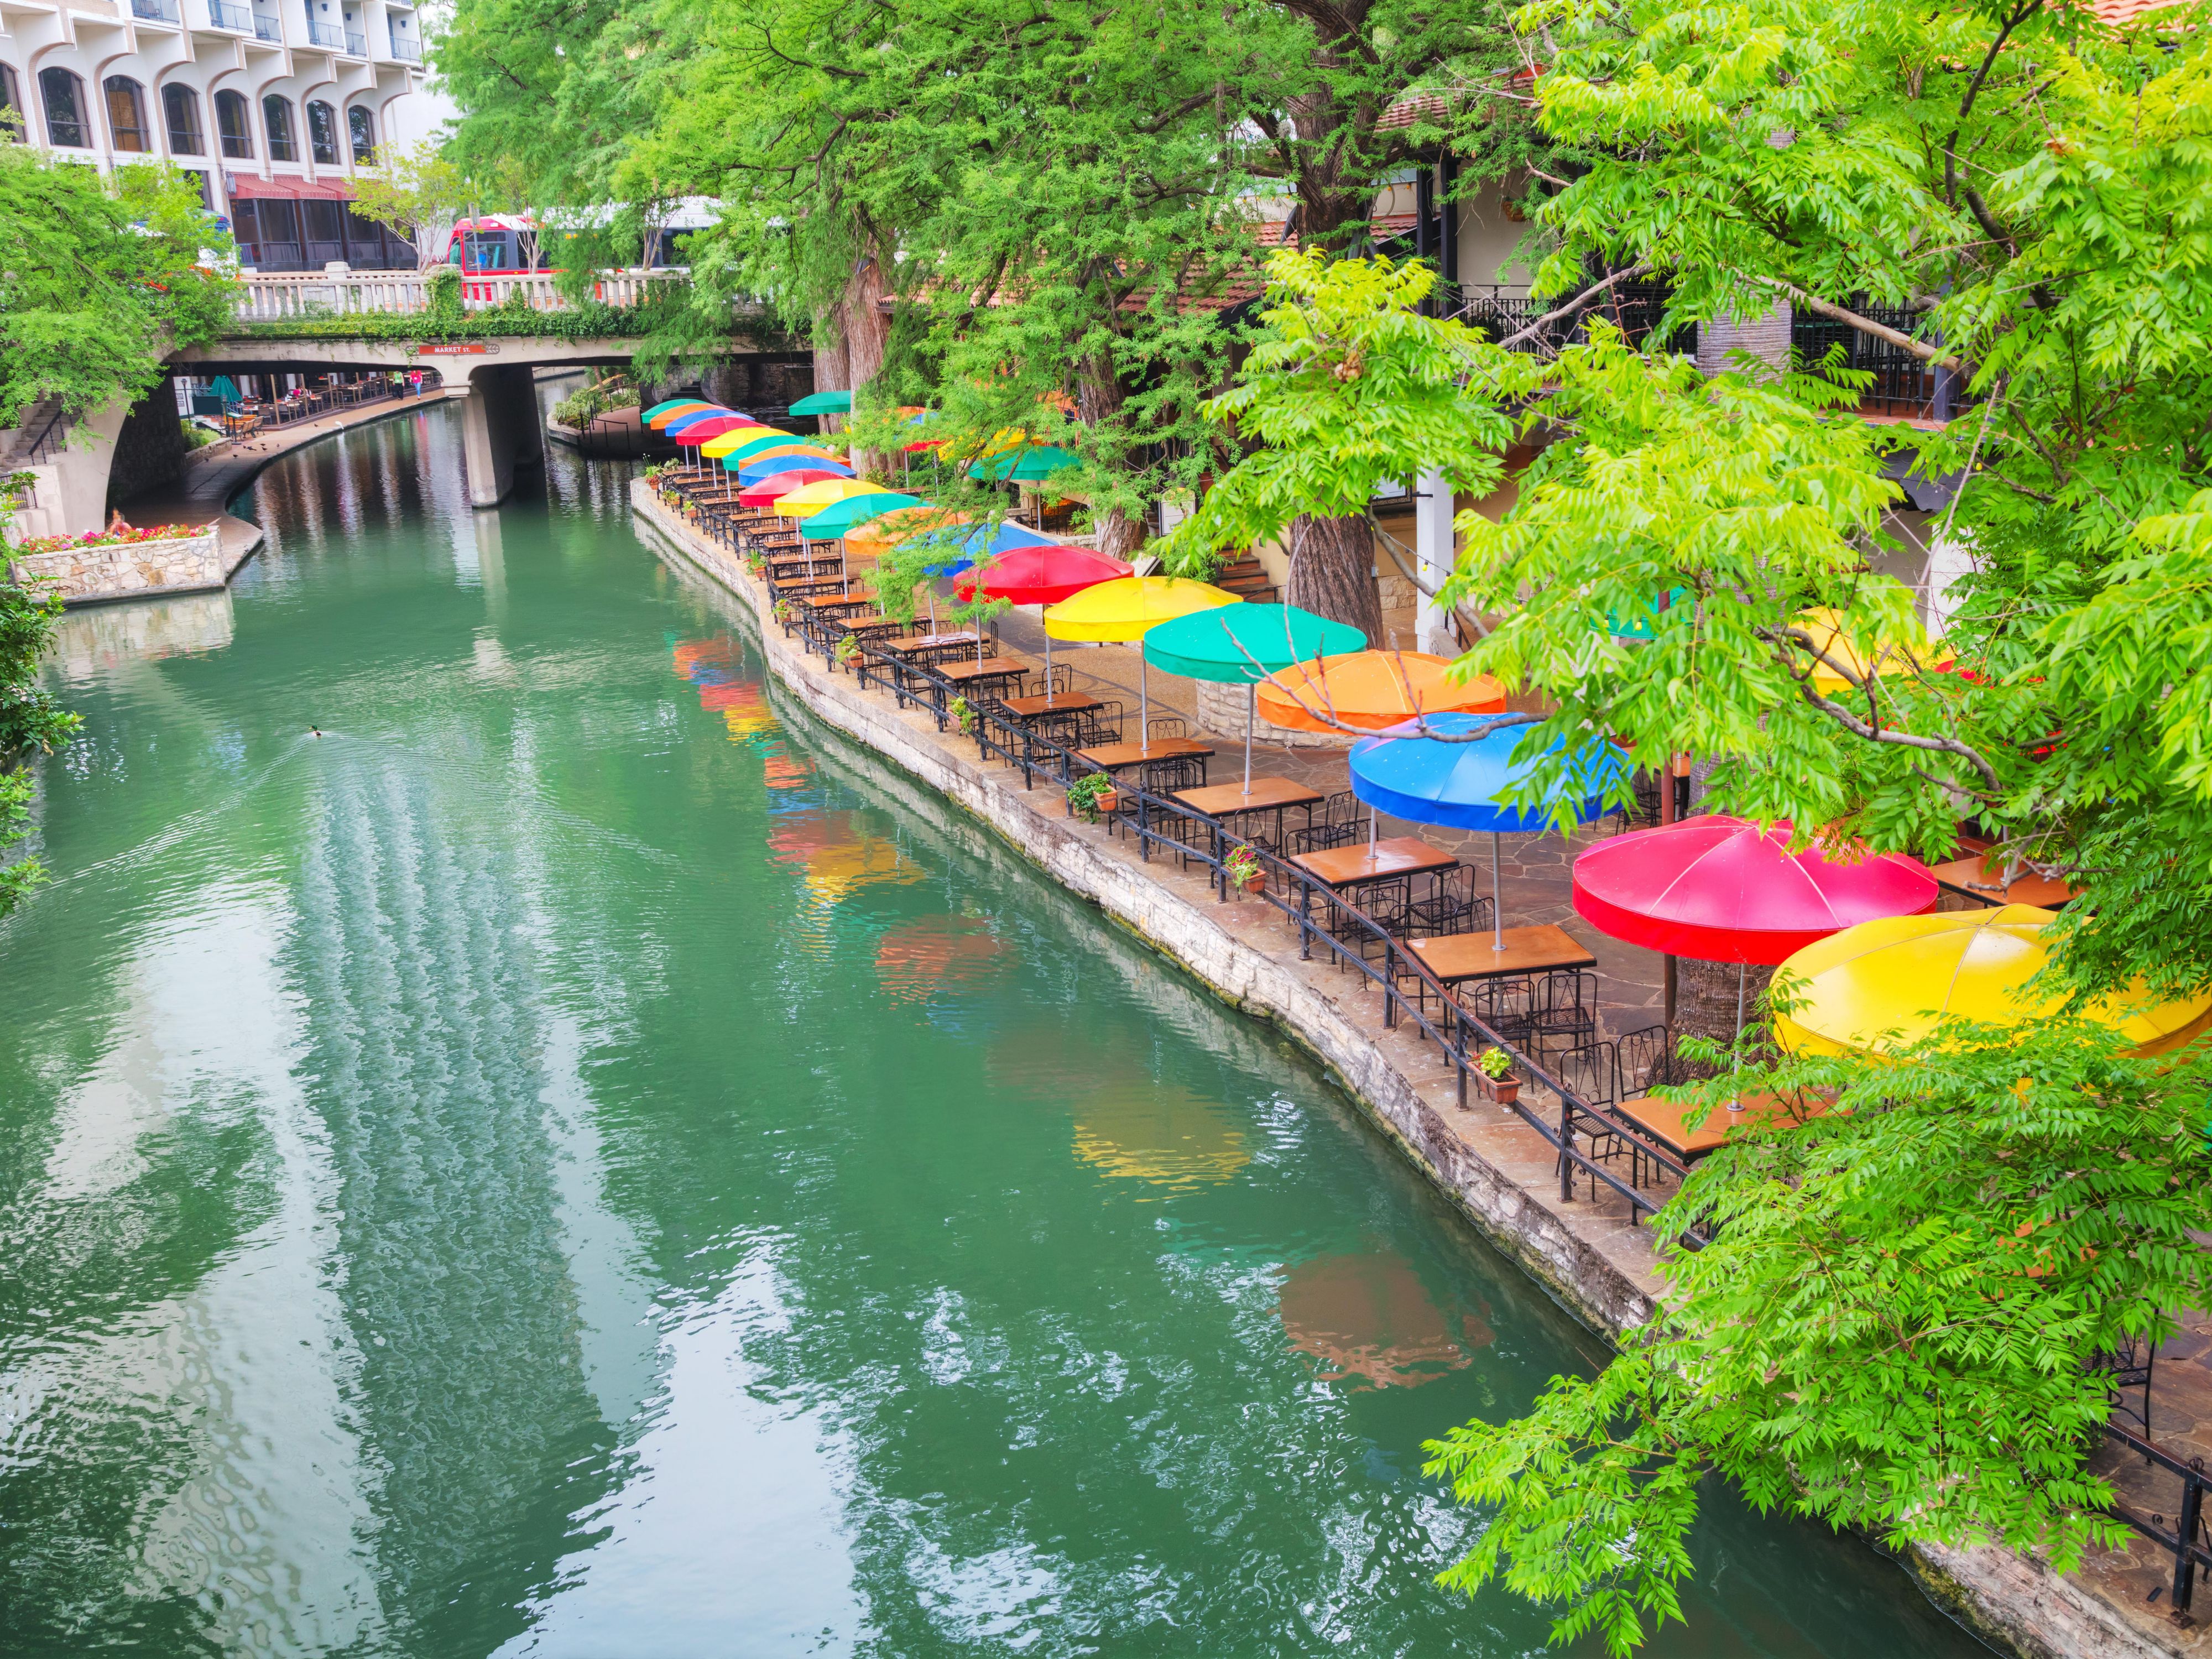 Enjoy a convenient location near the top attractions in San Antonio, including the San Antonio River Walk, San Antonio Zoo, Downtown, and The Alamo. The hotel is also just minutes from events at the University of Texas and close to Six Flags Fiesta Texas, one of the country's best theme parks.​